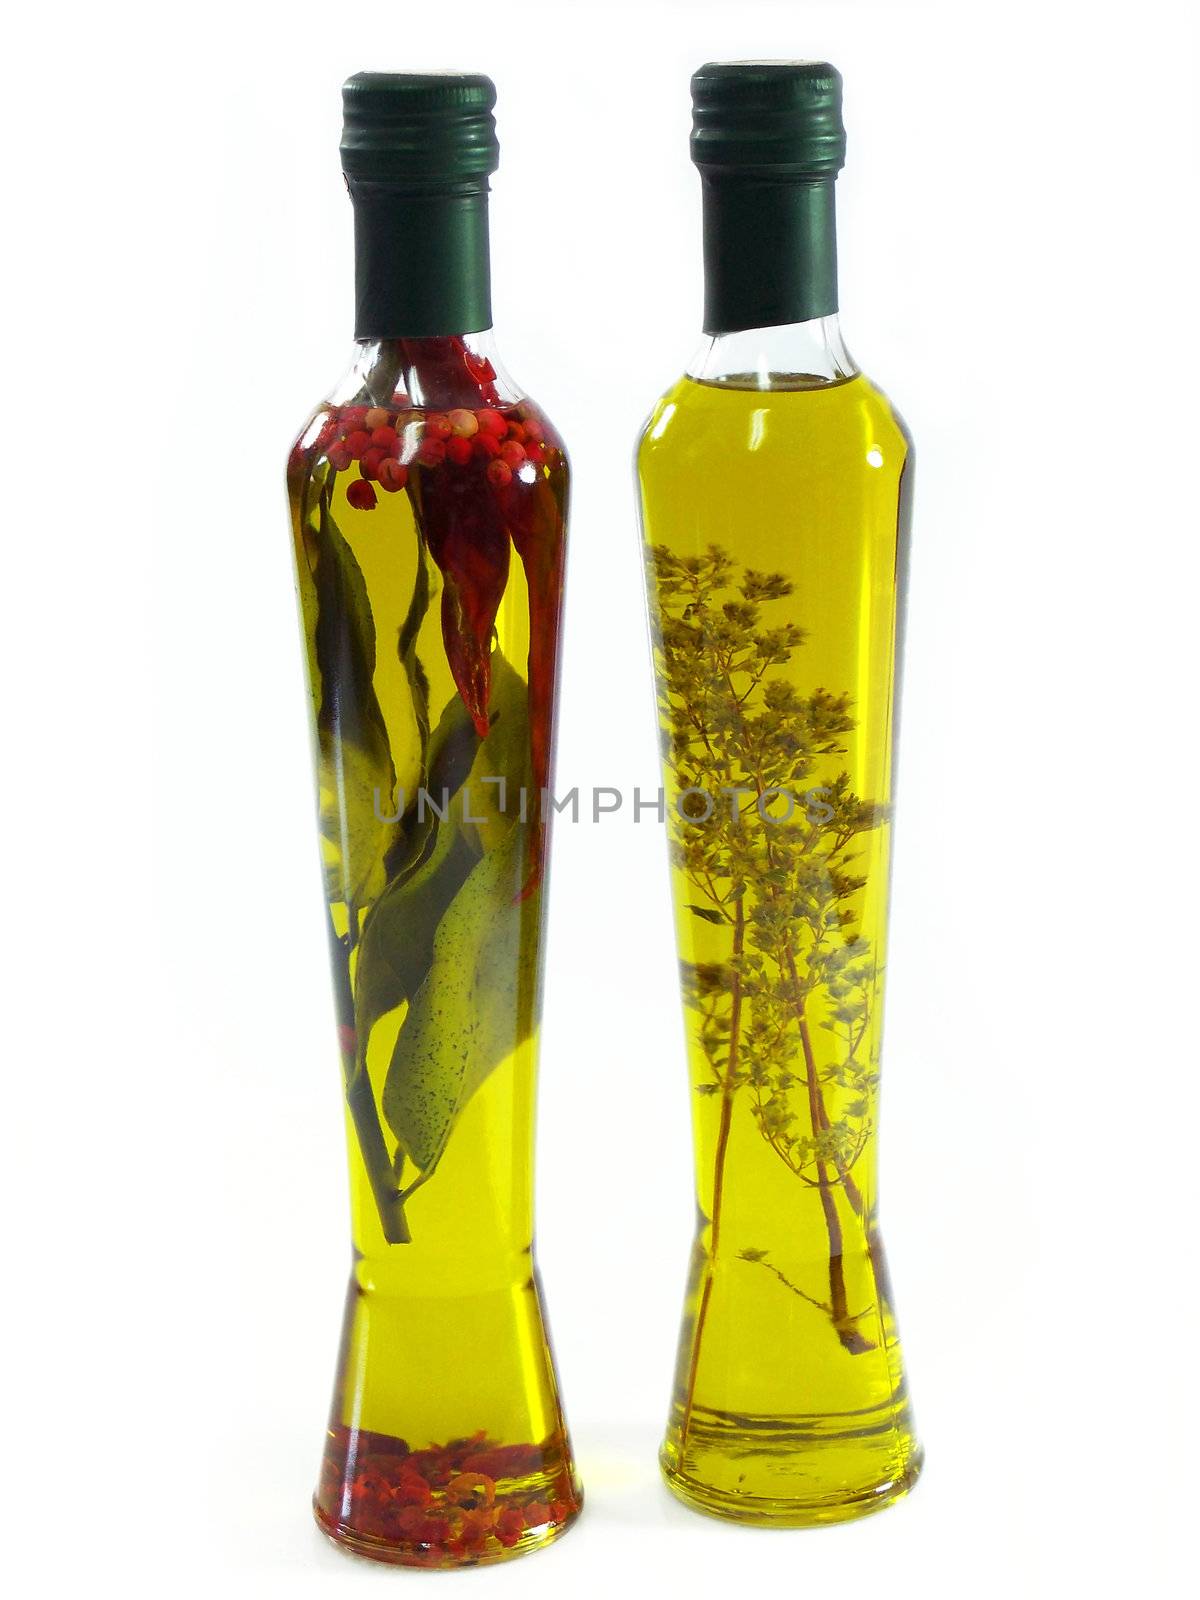 Olive Oil with Herbs by Teamarbeit